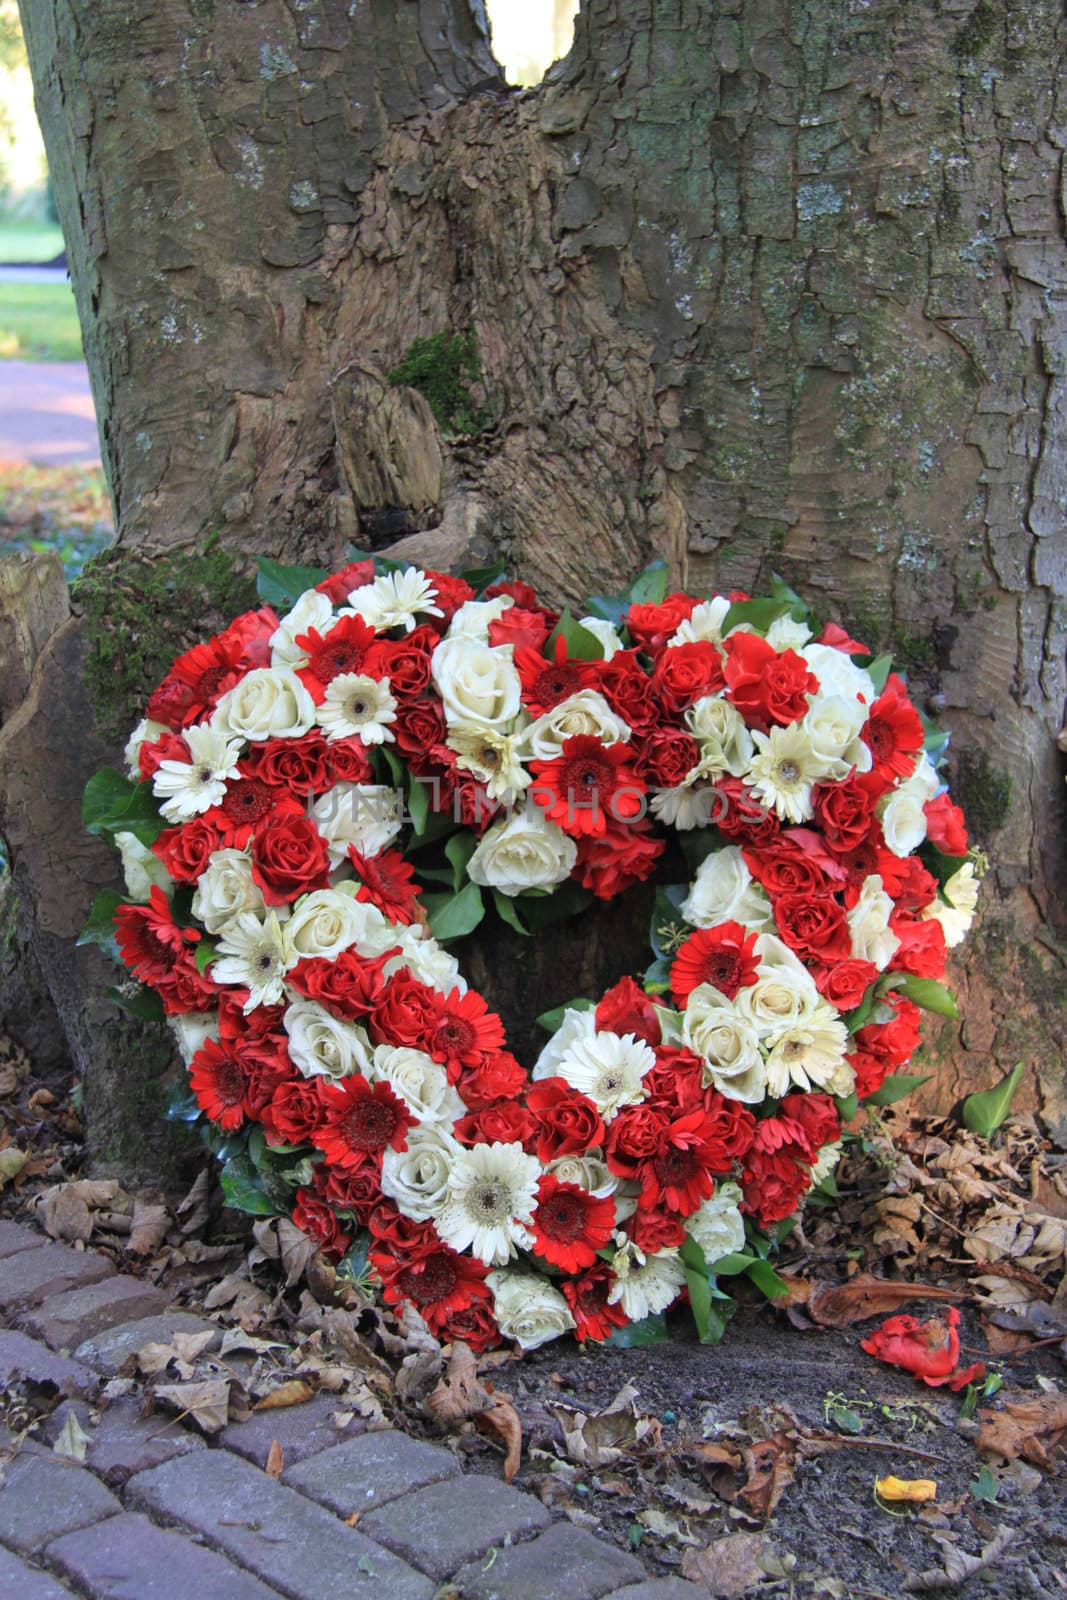 Heart shaped sympathy flower arrangement with red and white flowers